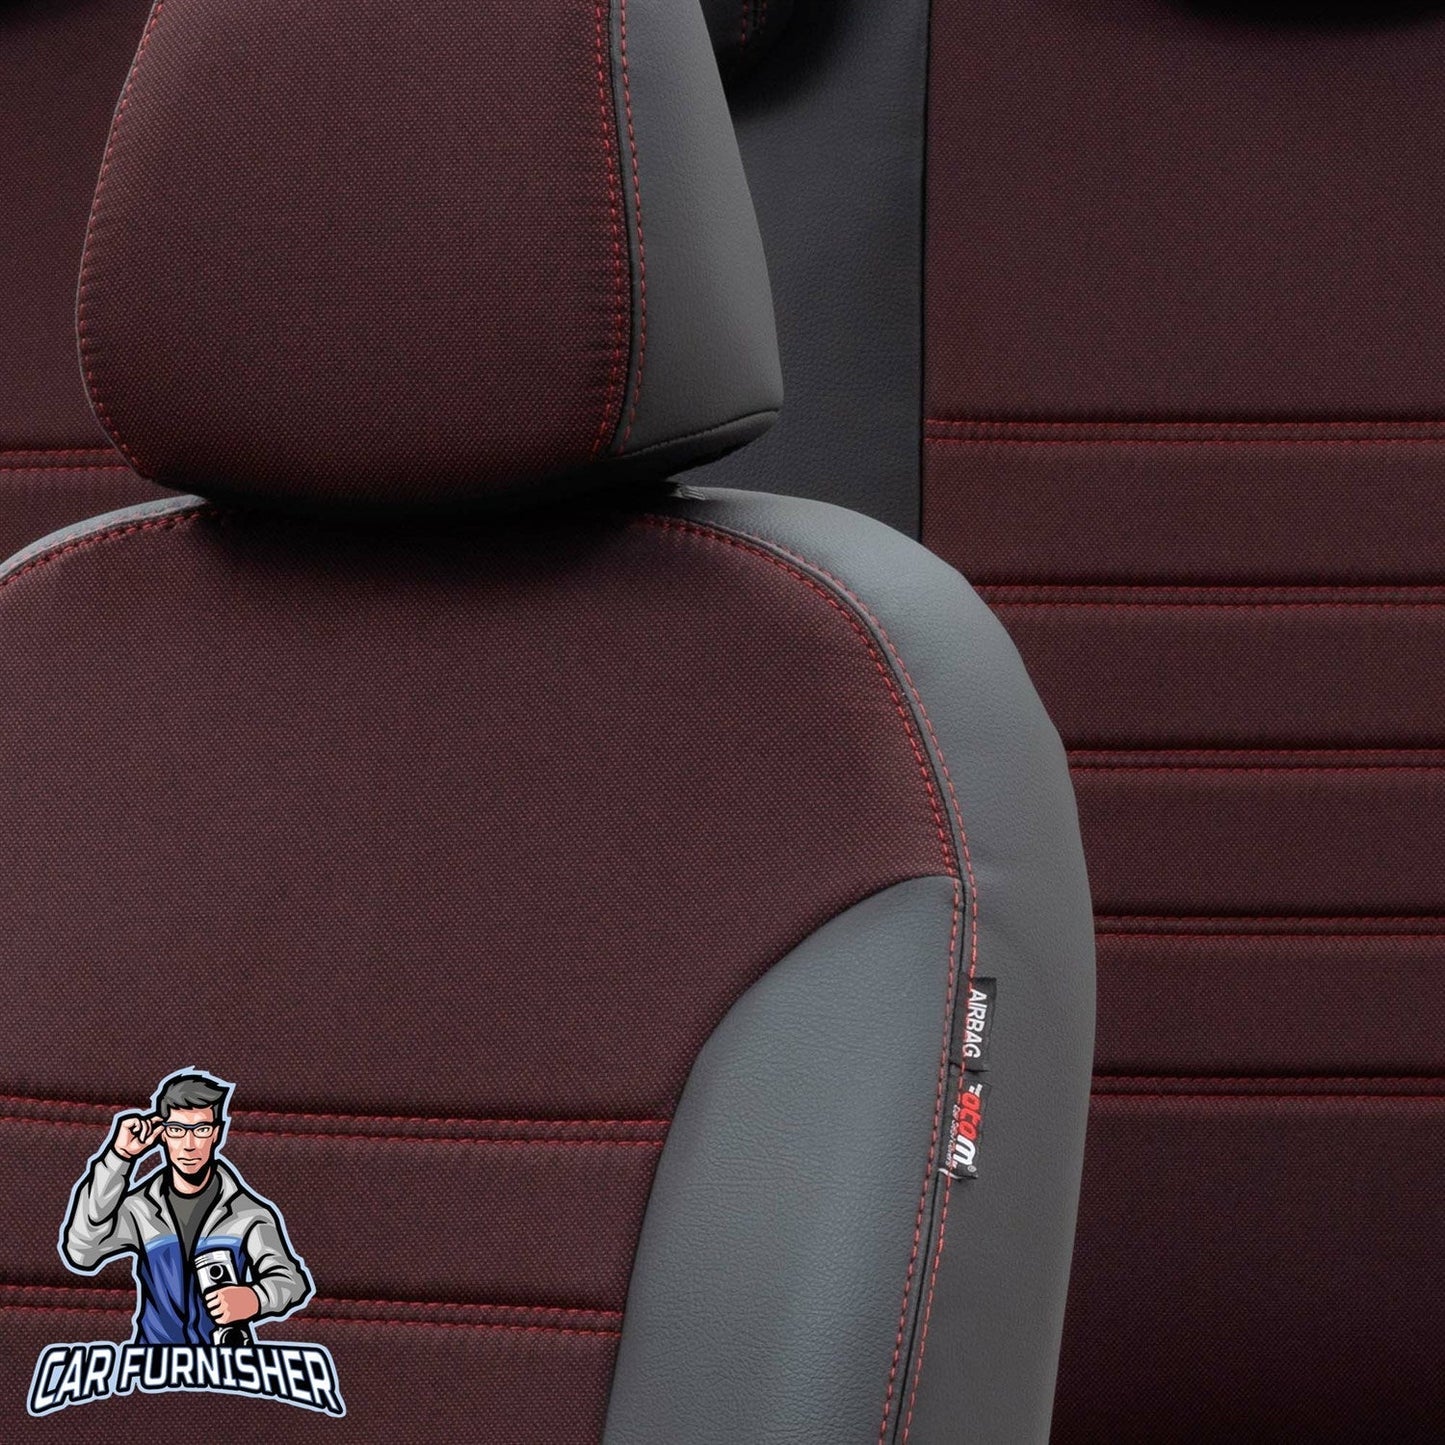 Ford B-Max Seat Covers Paris Leather & Jacquard Design Red Leather & Jacquard Fabric